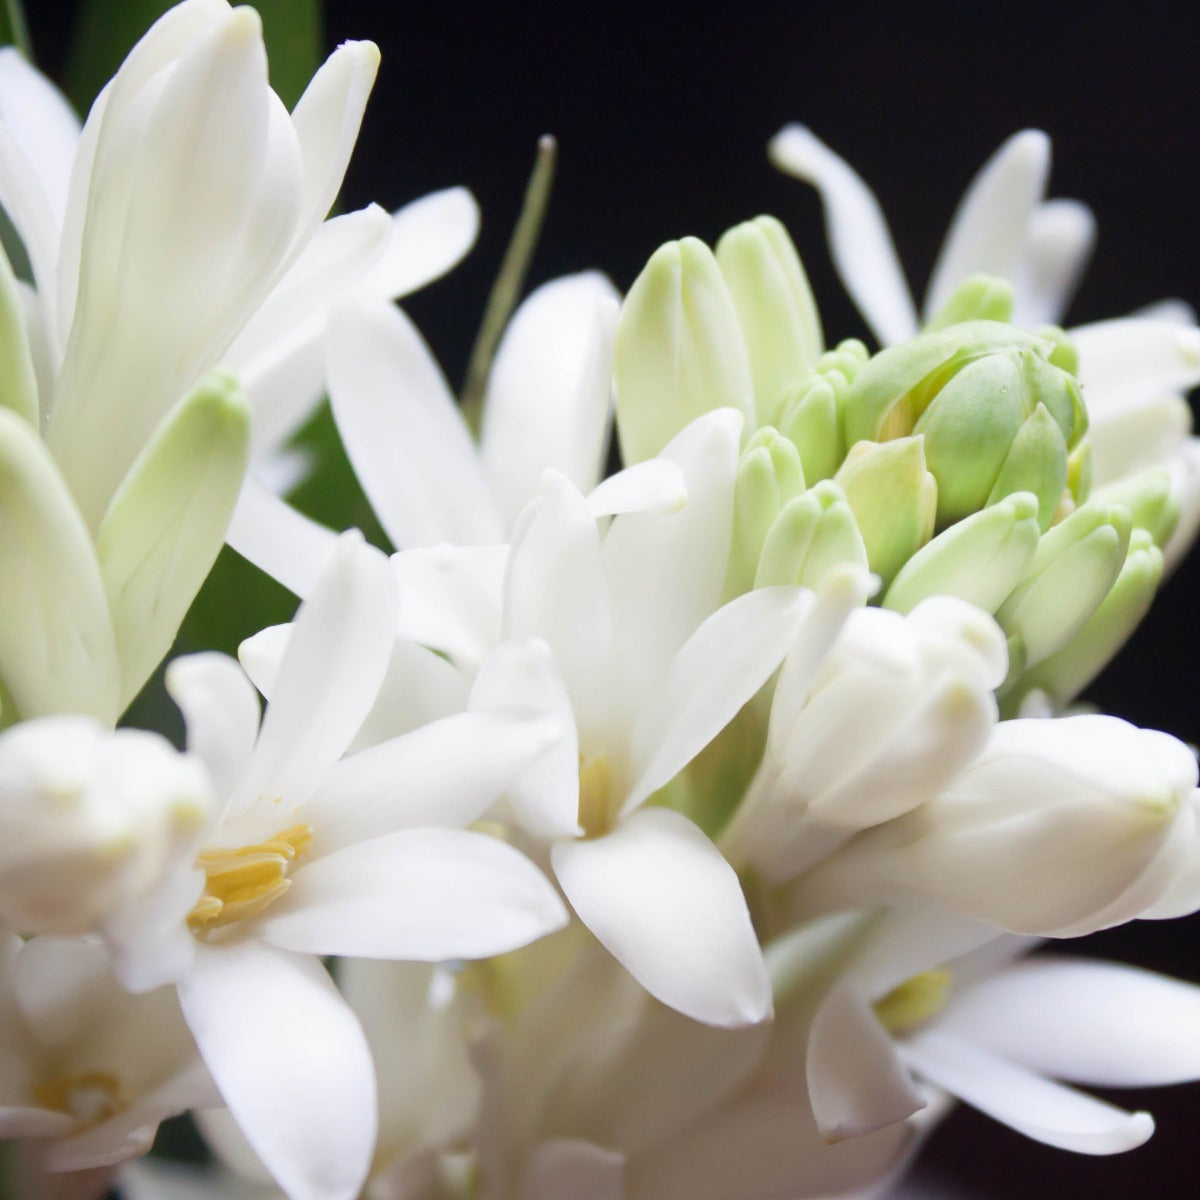 Close-up of a blooming tuberose flower cluster with white, tubular petals and some buds still in early stages of opening. The background is dark, contrasting with the bright, delicate flowers—a scene reminiscent of sipping Magic Hour Jasmine Moon White Tea of Reverence amid nature's beauty.